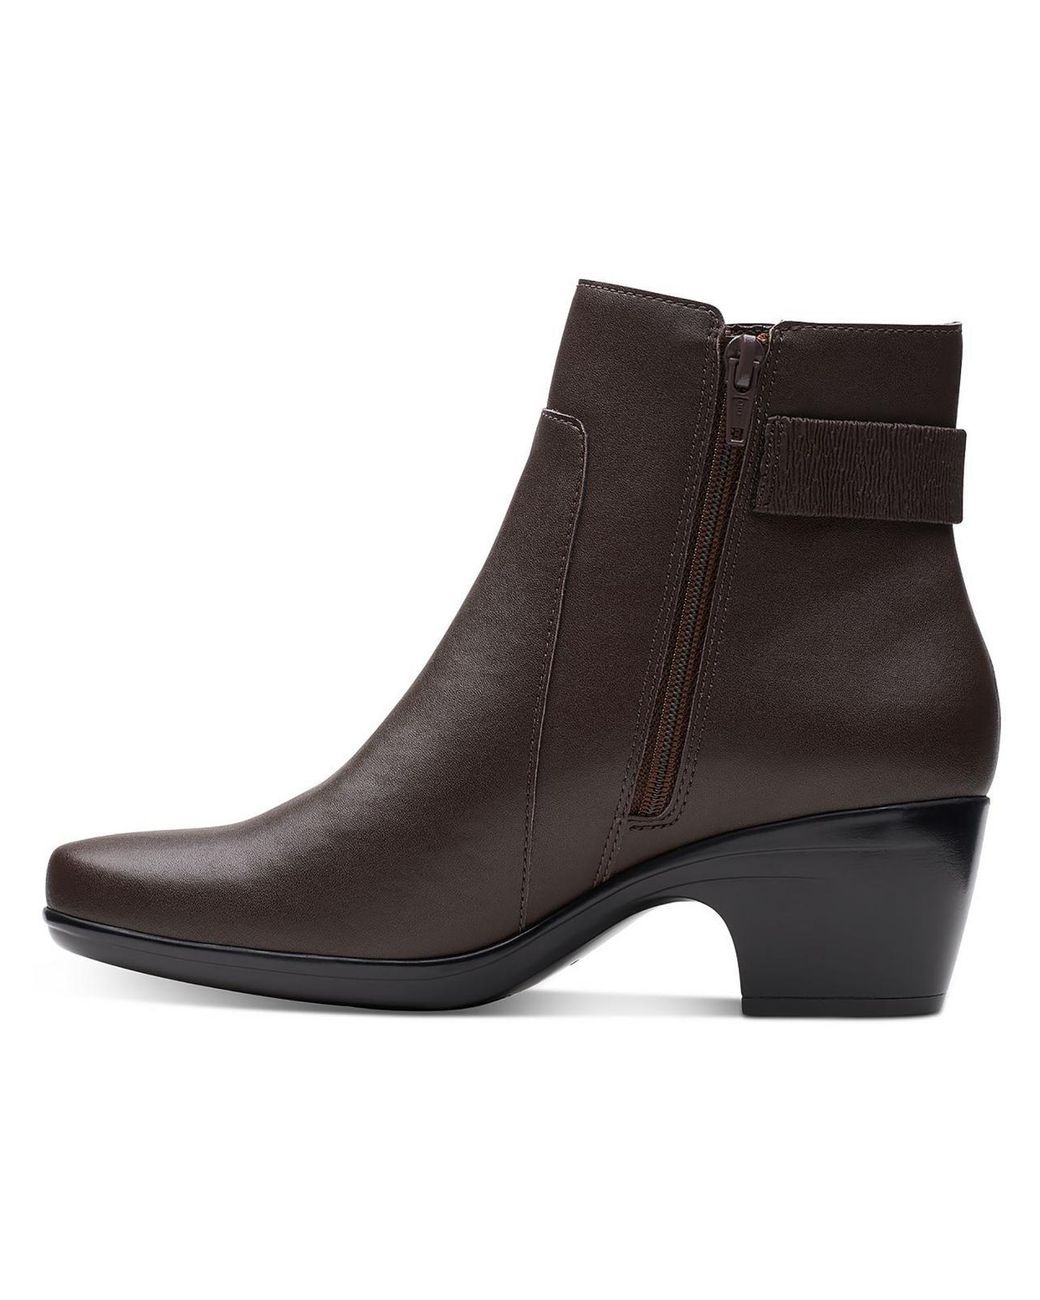 Clarks Emily Holly Leather Laceless Ankle Boots in Brown | Lyst